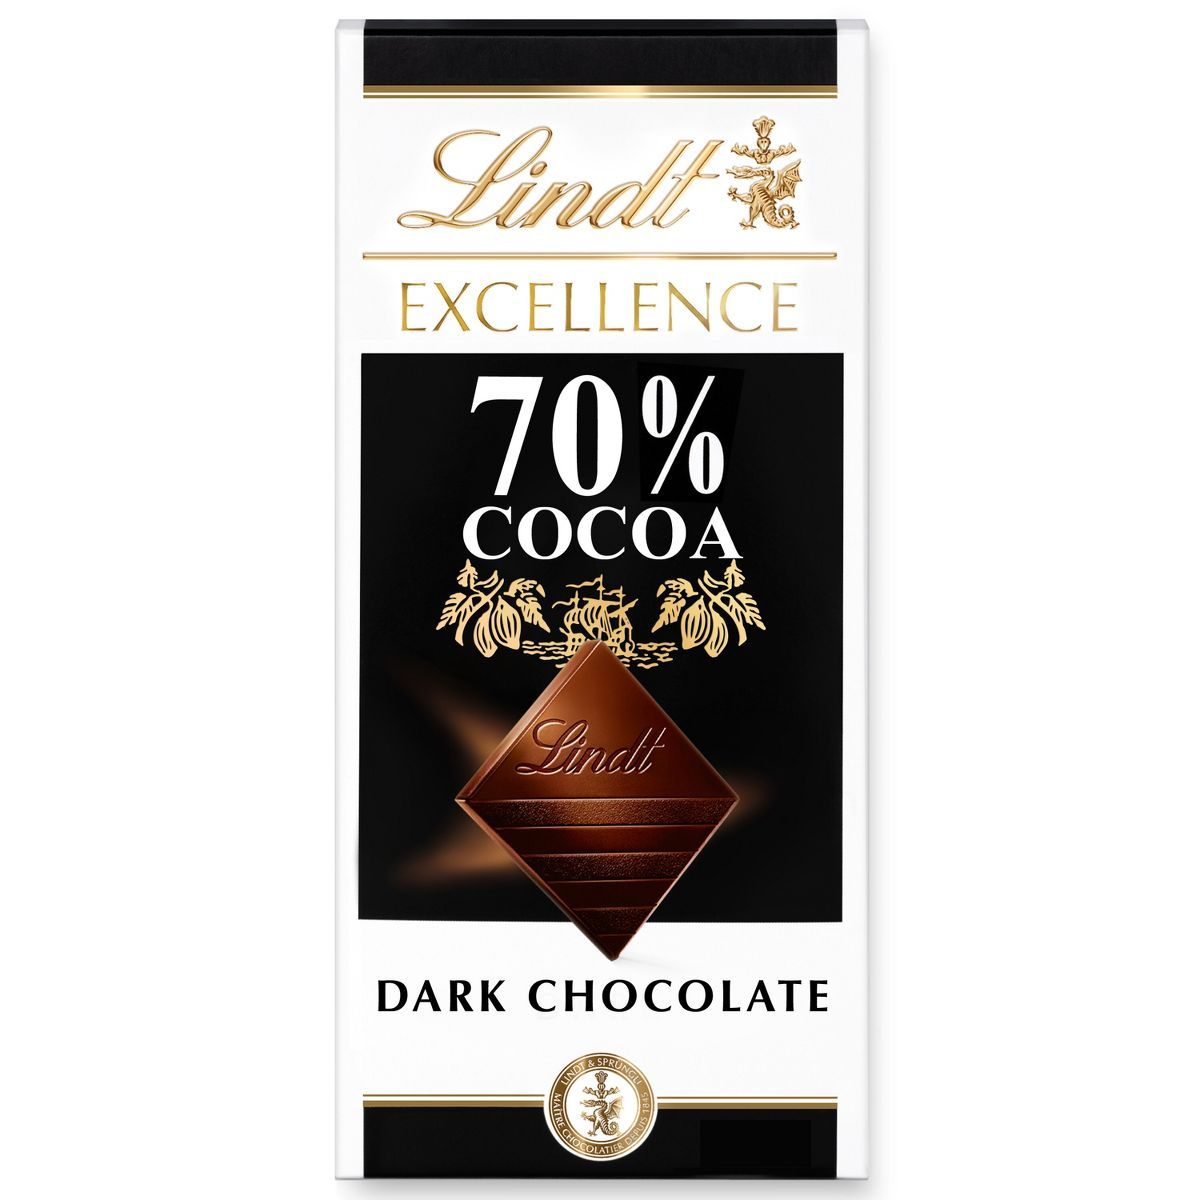 Lindt Excellence 70% Cocoa Dark Chocolate Candy Bar - 3.5 oz. | Target